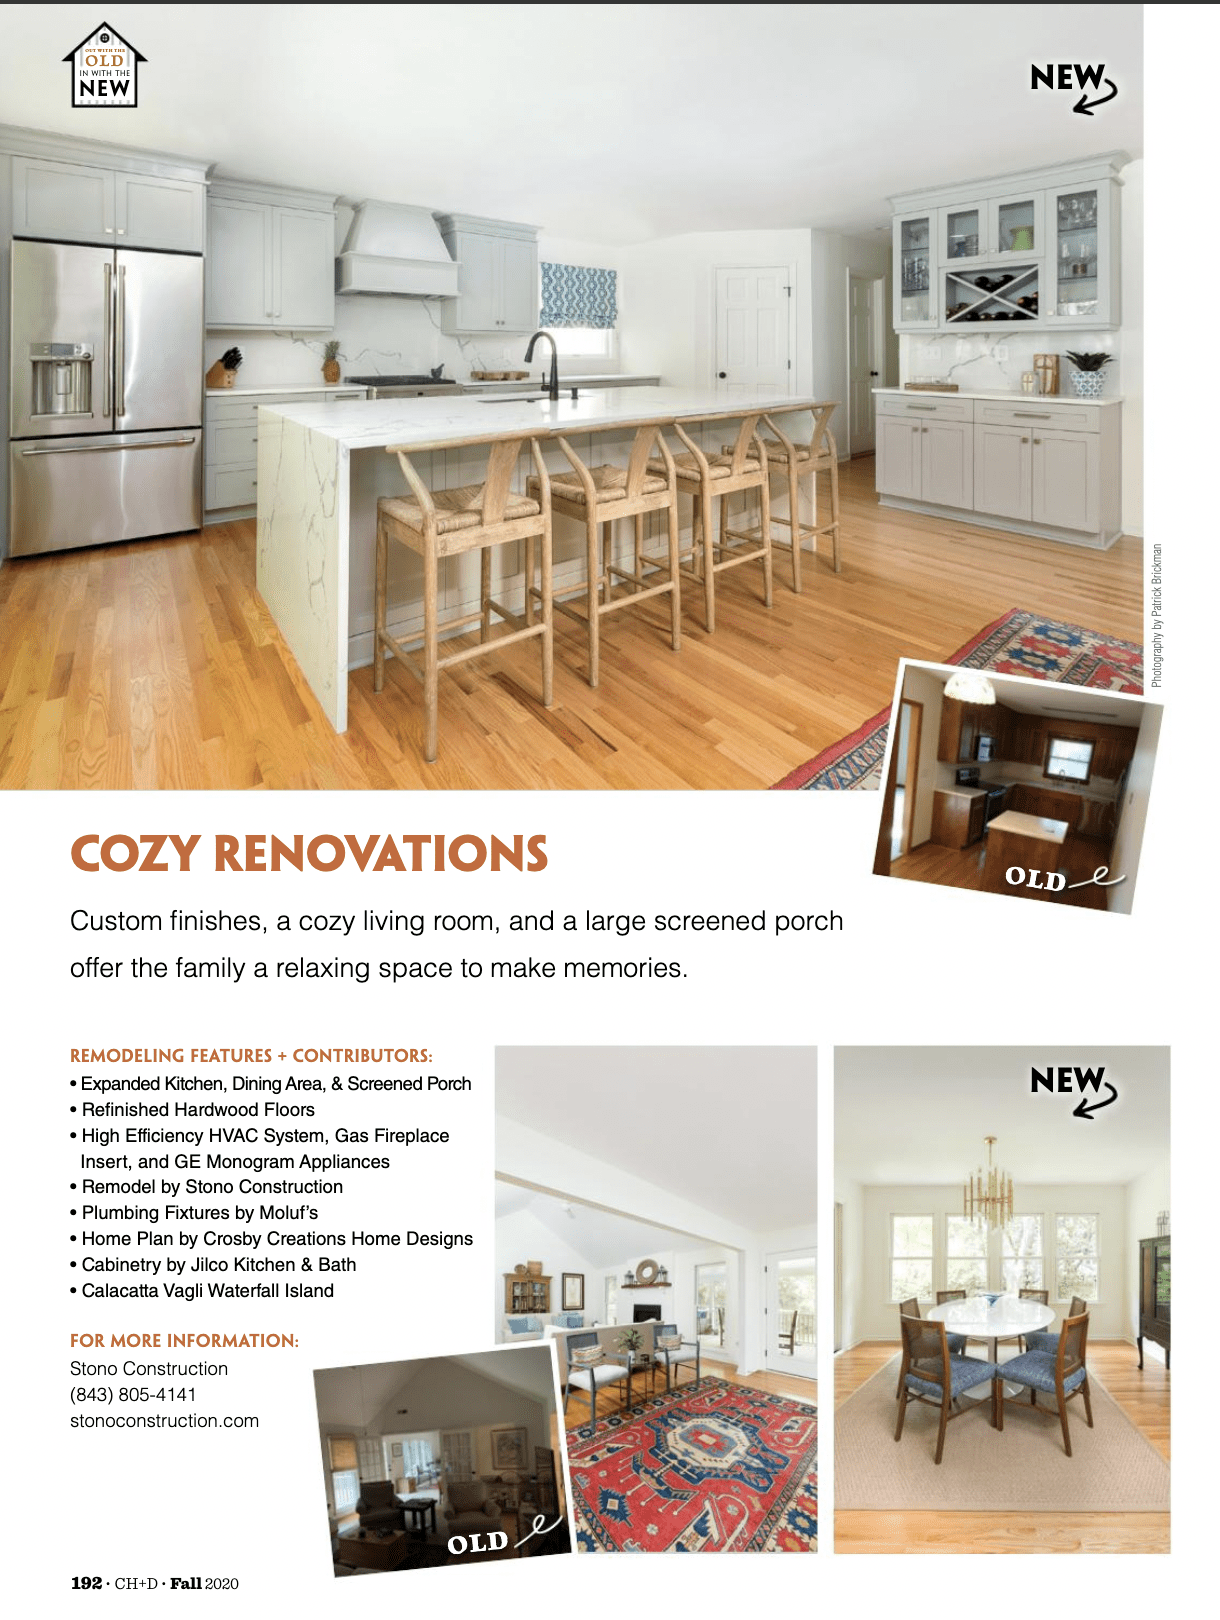 Article screenshot from Charleston Home and Design Magazine titled "Cozy Renovations" and featuring one of Stono Construction's renovation projects. 